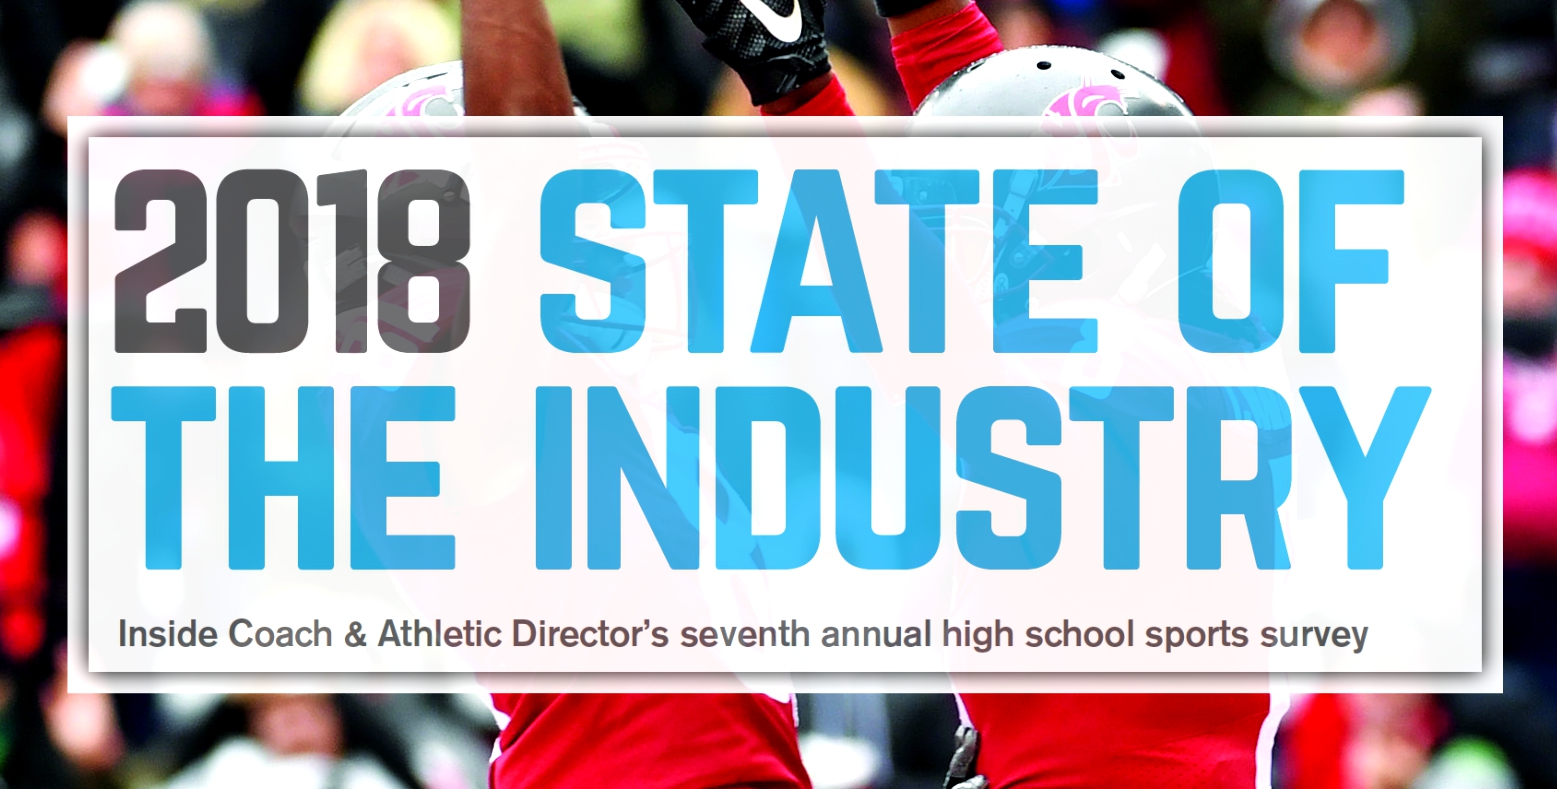 The top five concerns of athletic directors